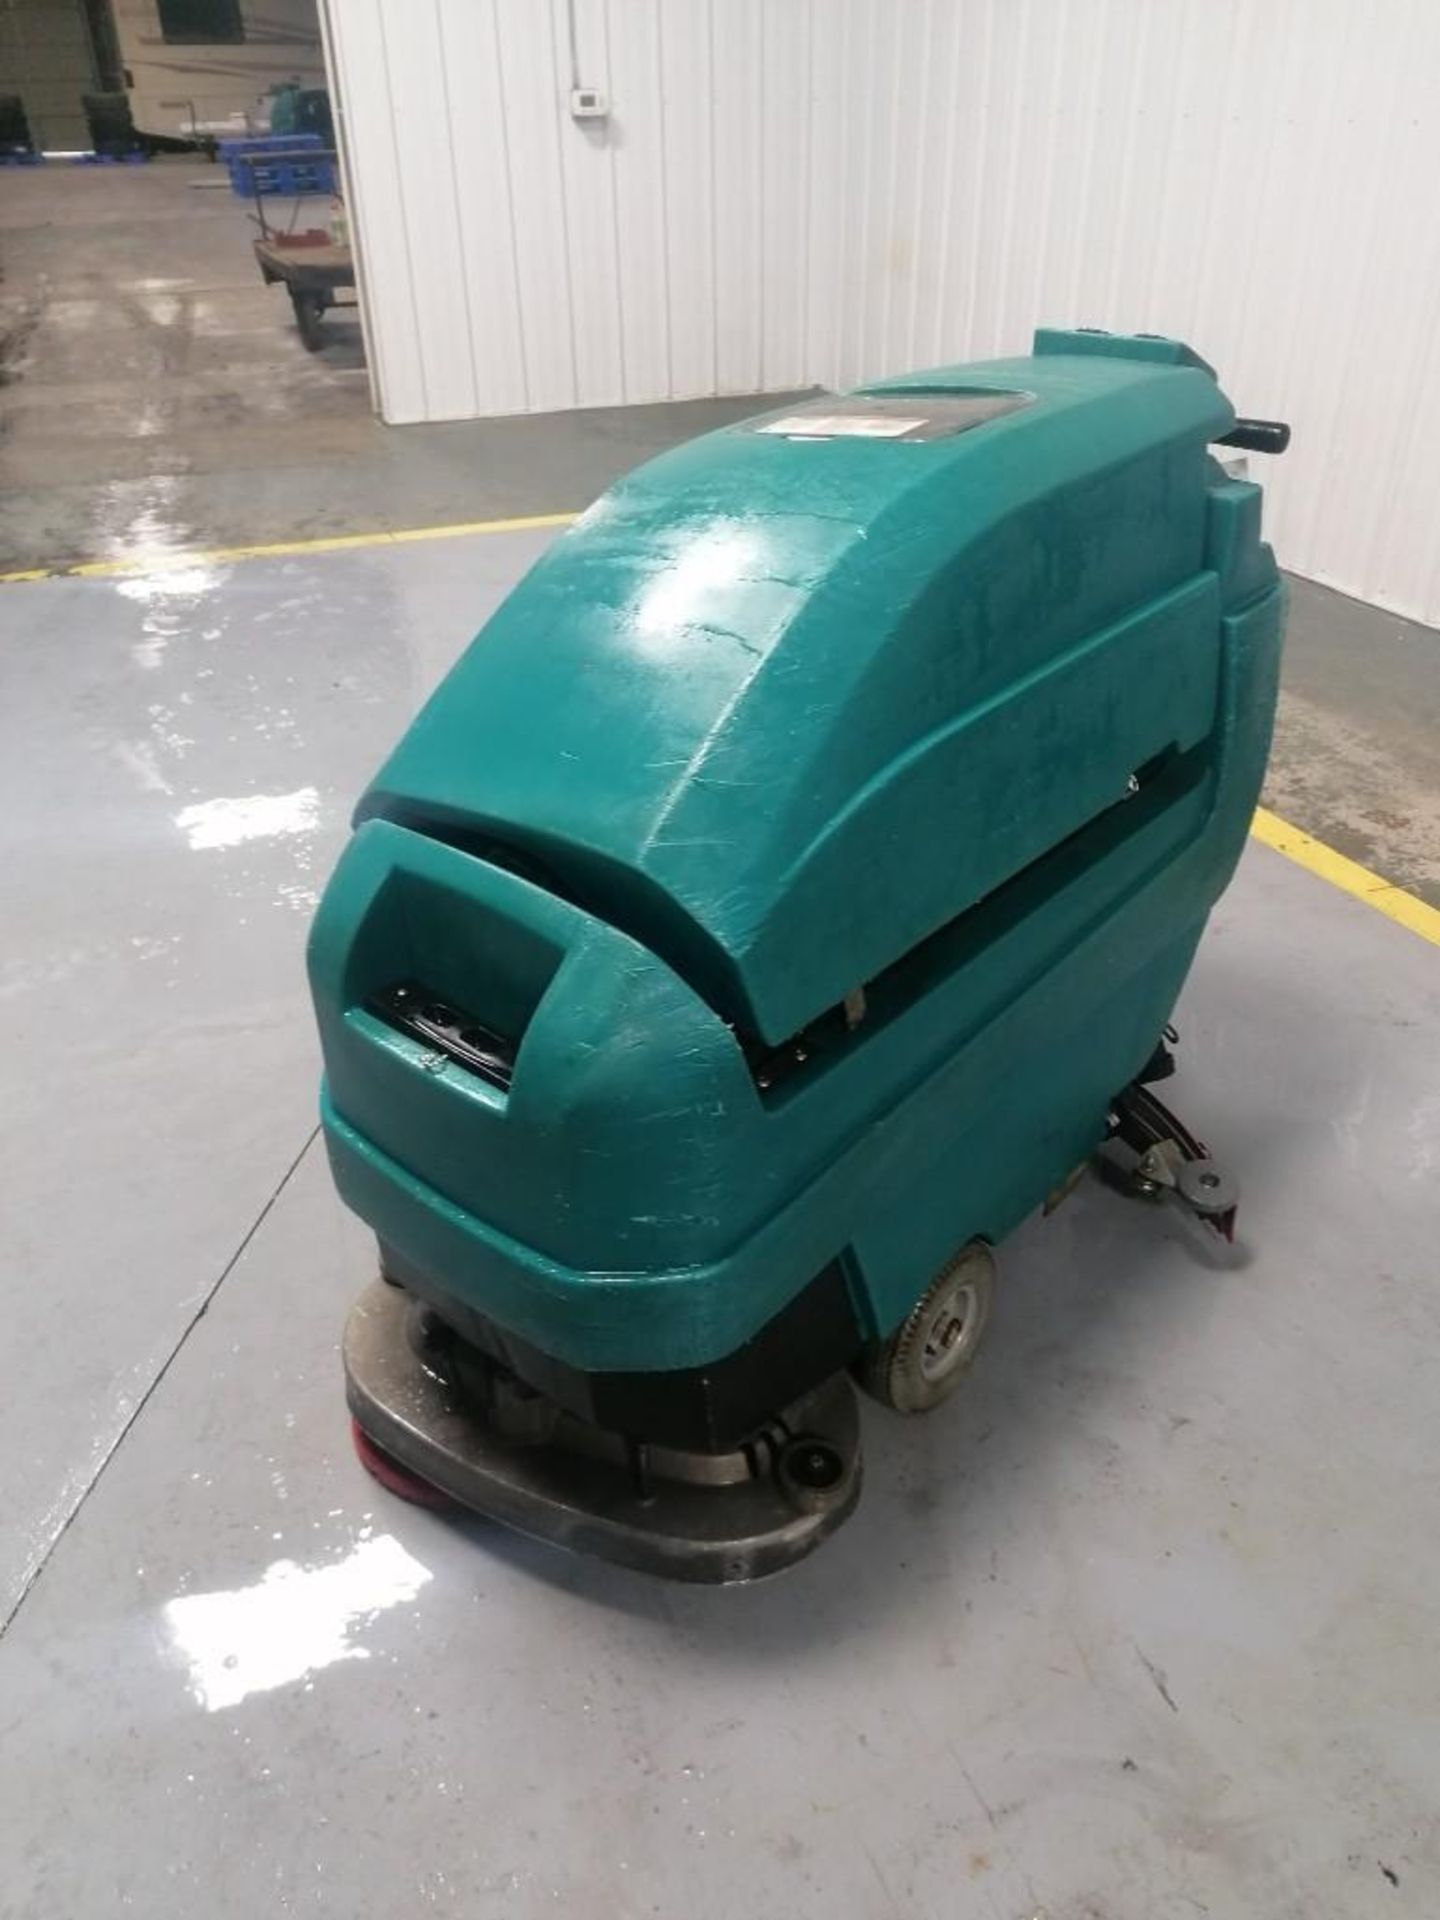 Tennant 5400 Floor Scrubber, Serial #540010229139 24 V, 21 Hours. Located in Mt. Pleasant, IA. - Image 17 of 19